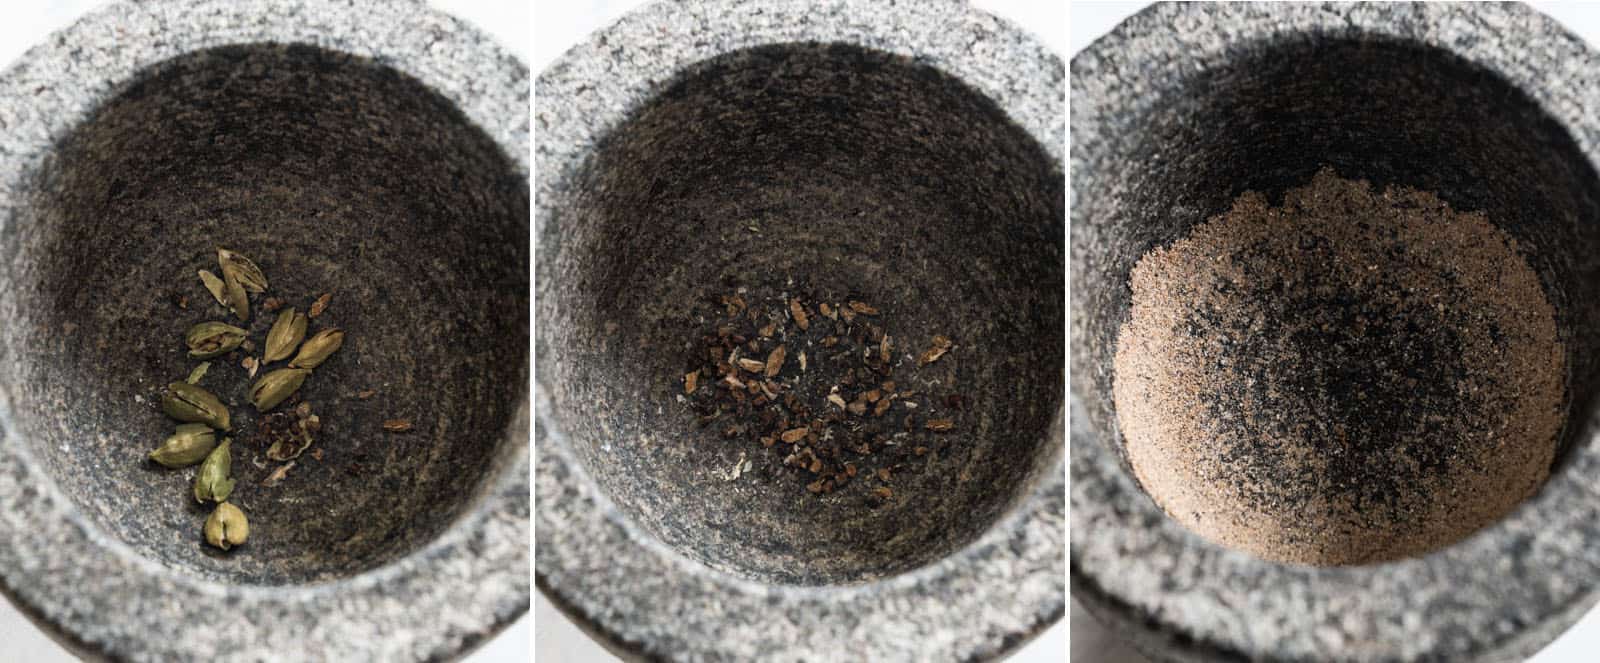 Different stages of grinding cardamom seeds